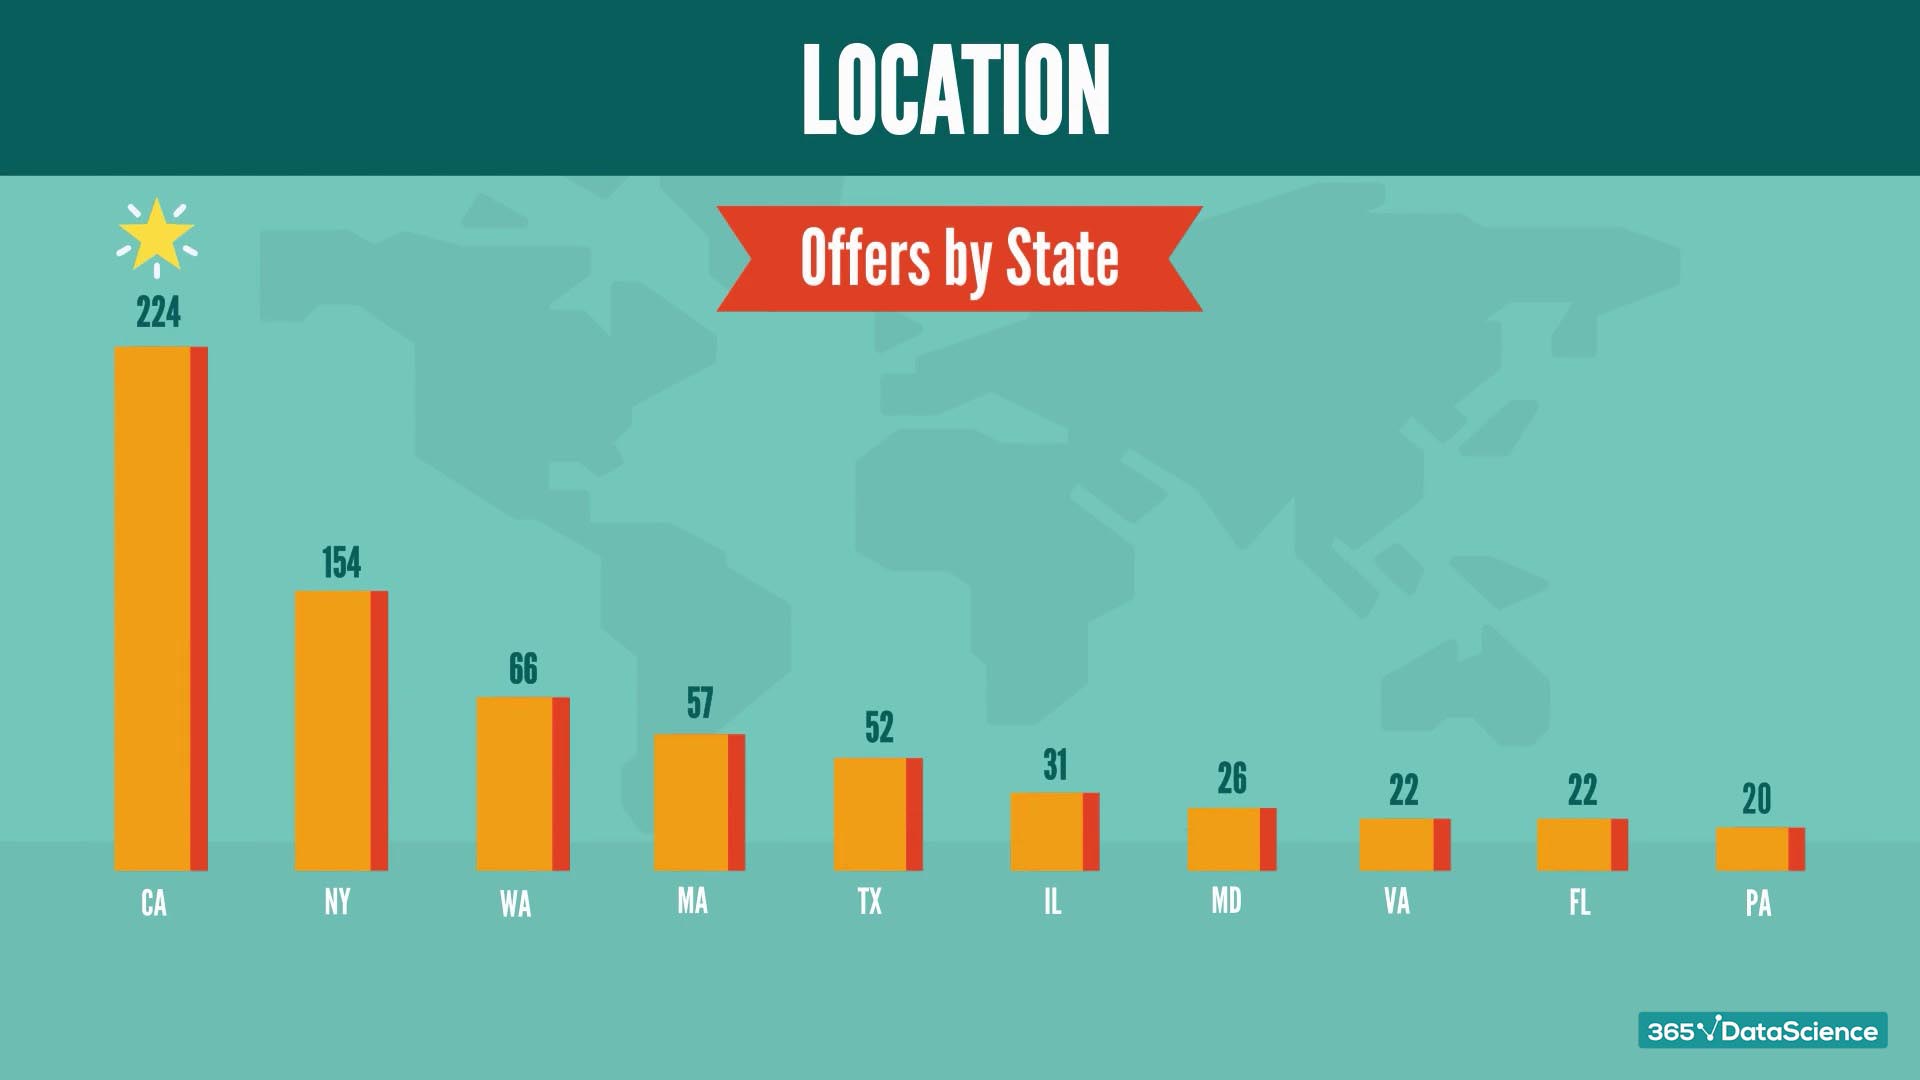 U.S. states with the highest number of Python job ads